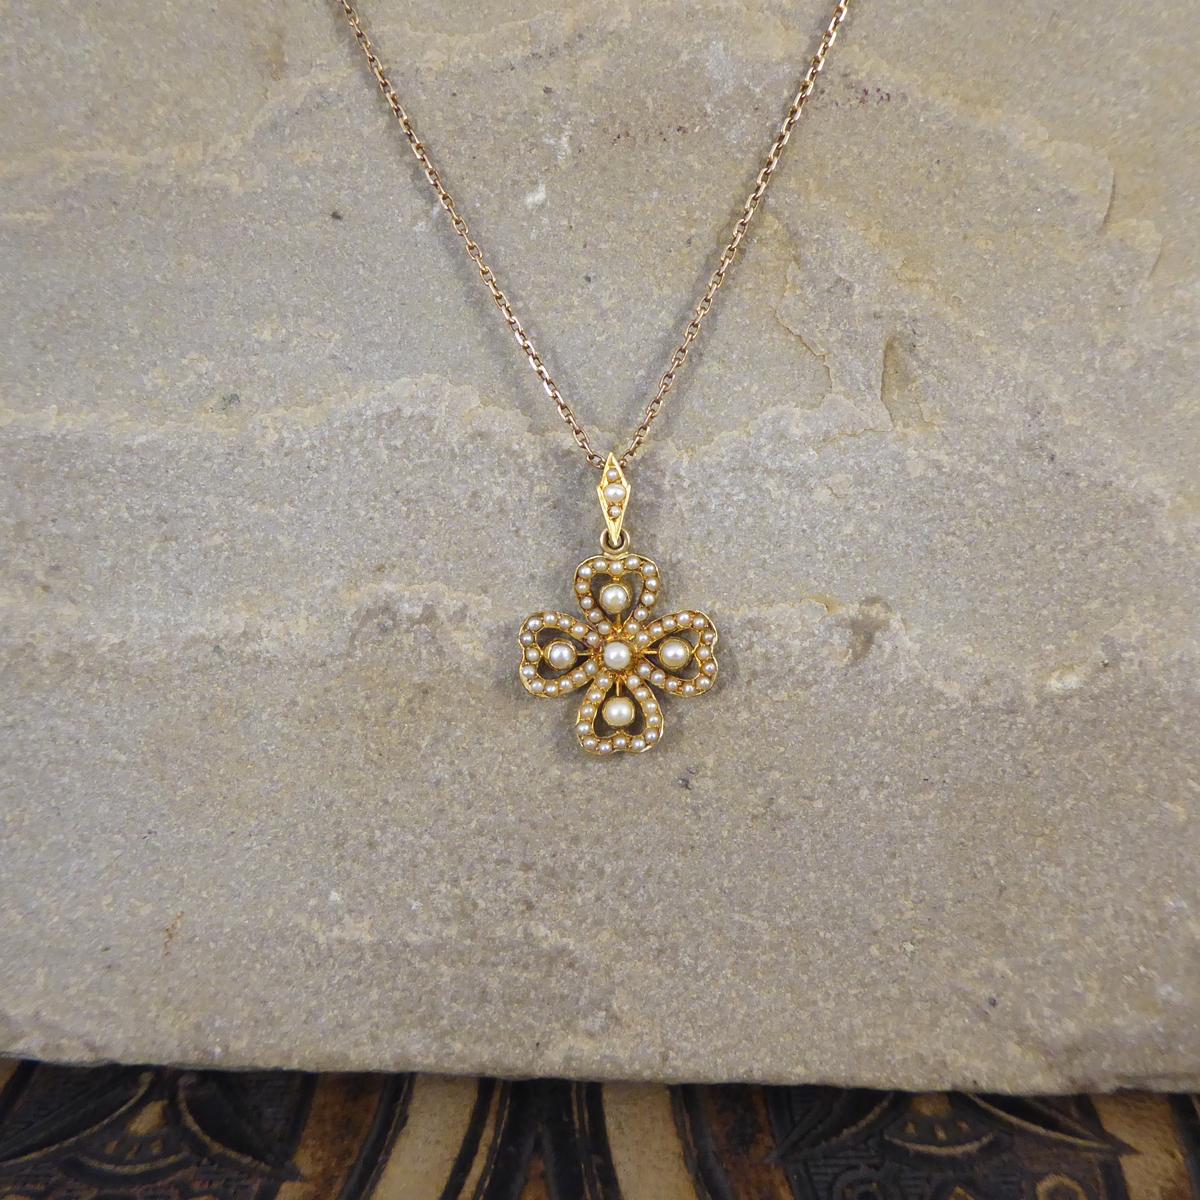 This gorgeous little necklace has been hand crafted in the Edwardian era with love and quality. Sitting on a contemporary 9ct Yellow Gold chain is a flower shaped pendant featuring 7 Garnets in a 9ct Yellow Gold rub over setting. The perfect gift